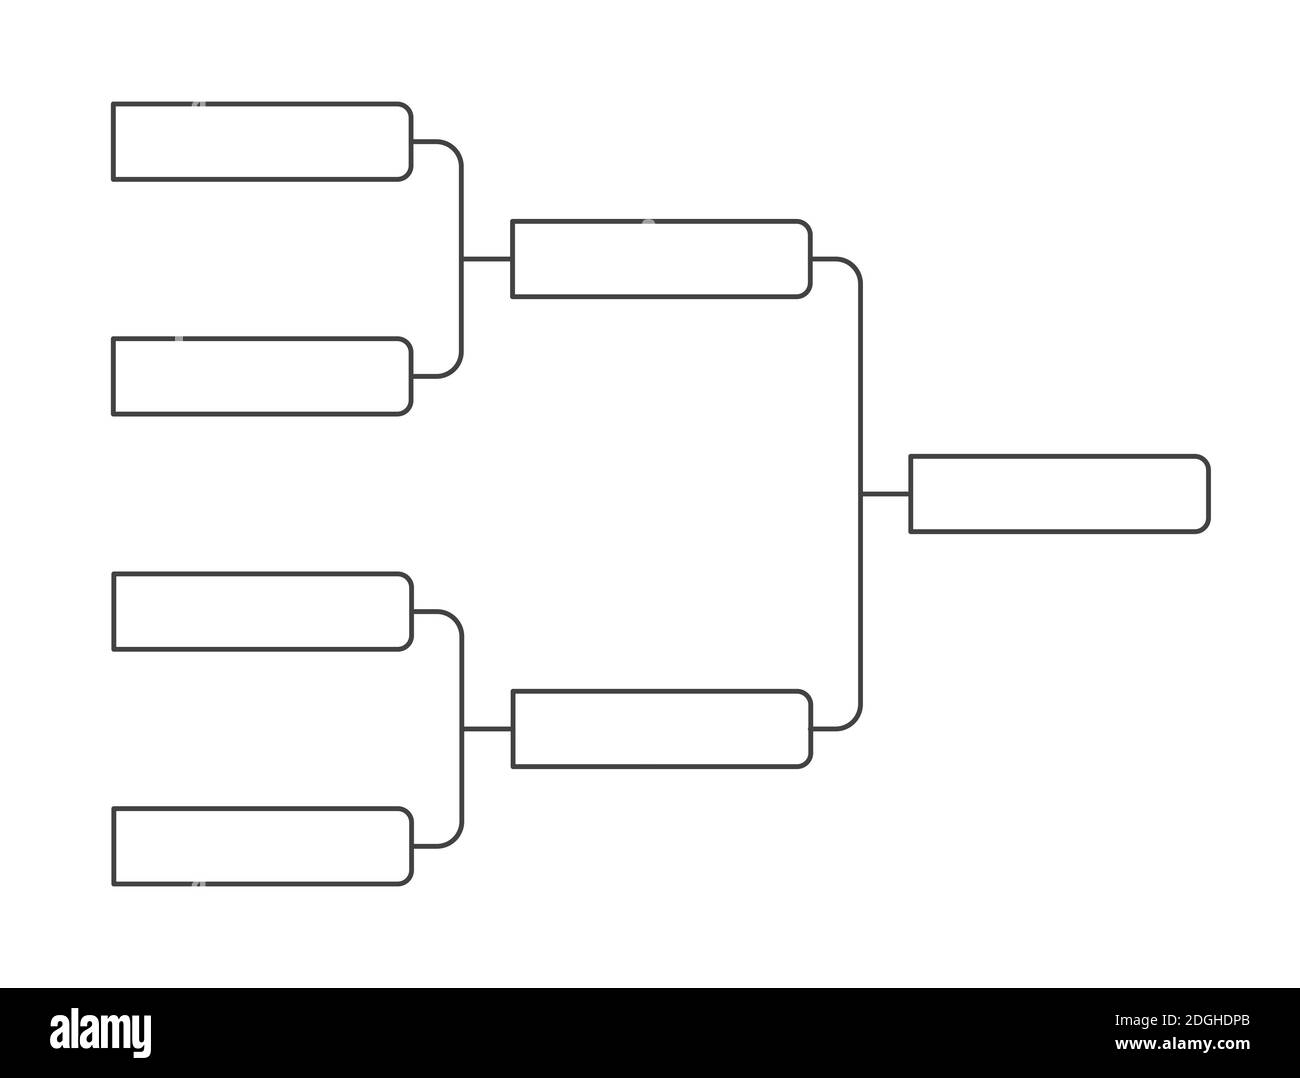 4 team tournament bracket championship template flat style design vector illustration isolated on white background. Championship bracket schedule for Stock Vector